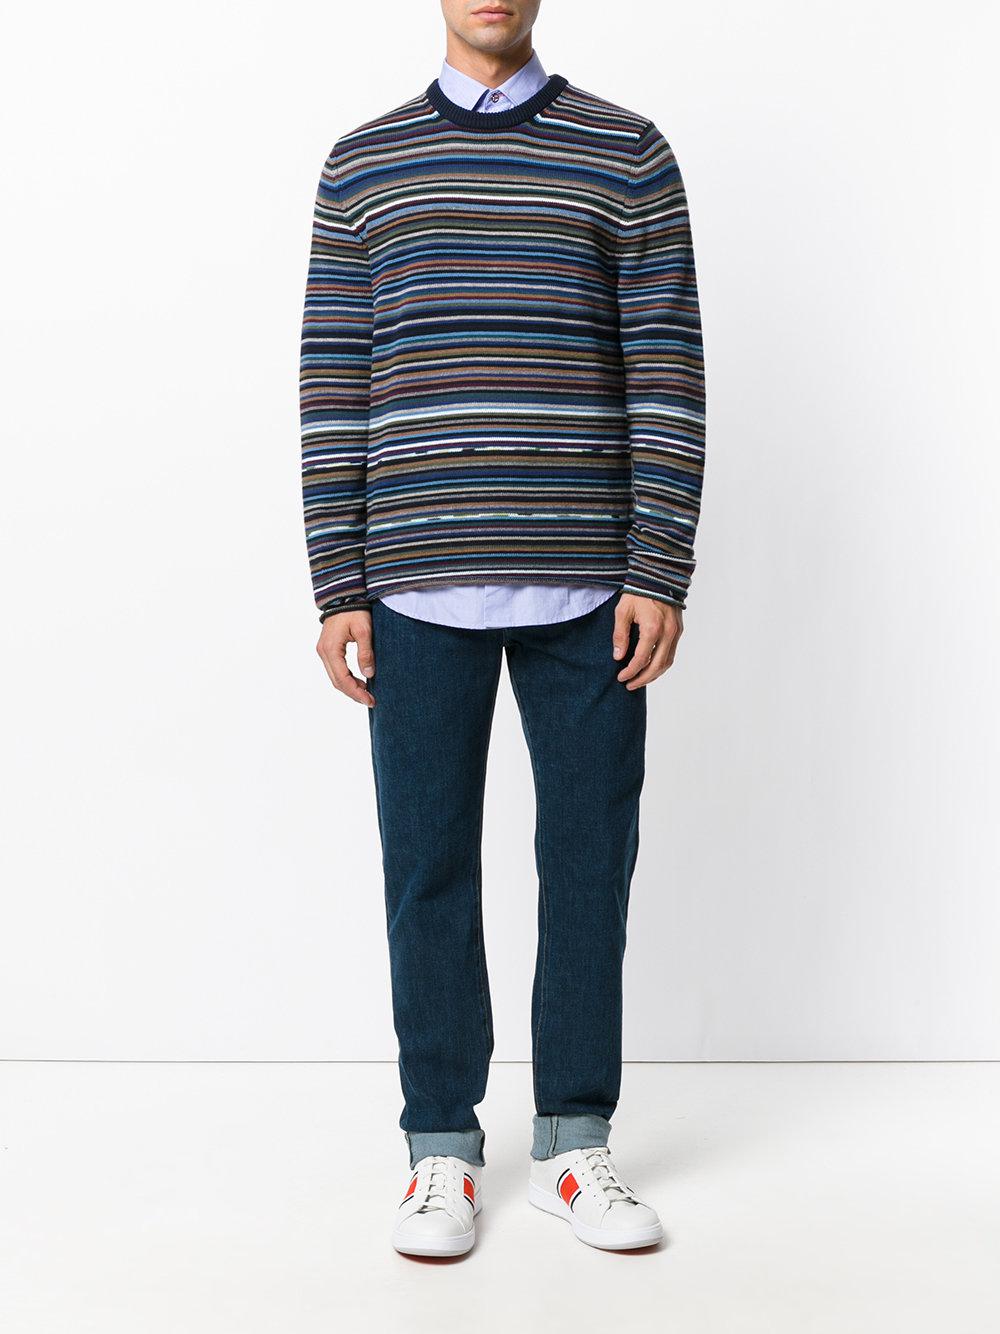 Lyst - Ps By Paul Smith Striped Knit Jumper in Blue for Men